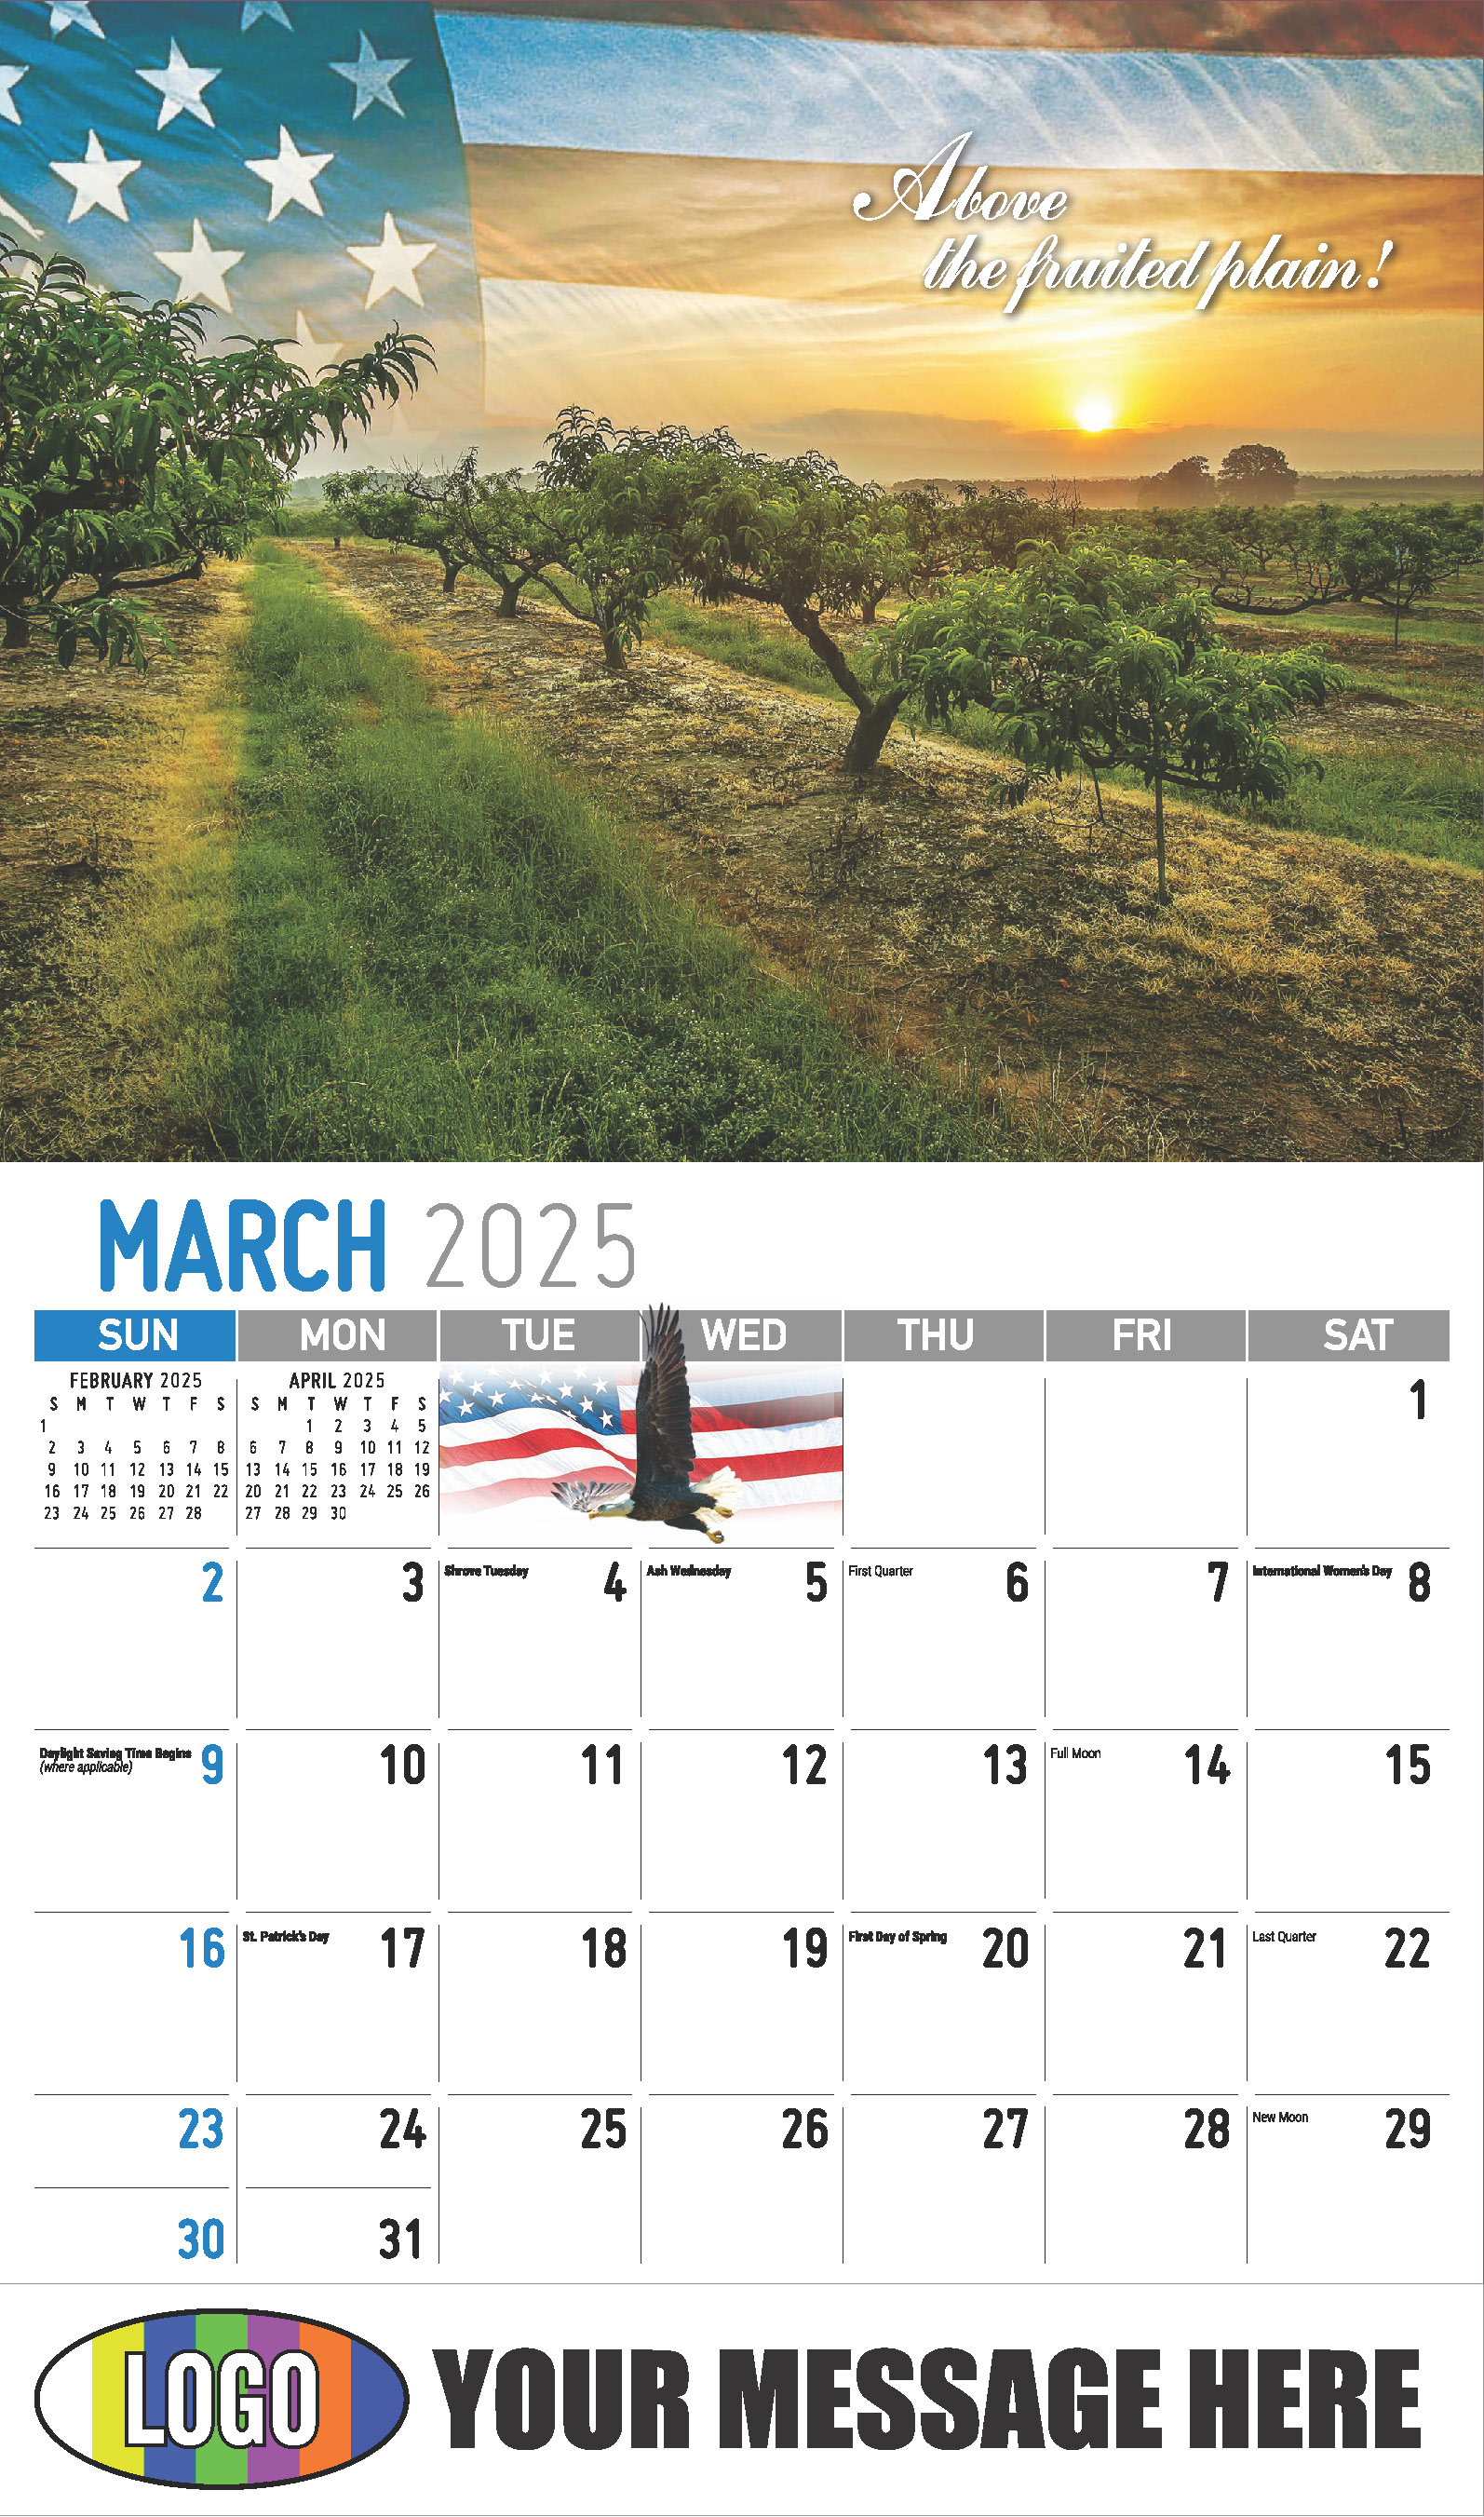 America the Beautiful  2025 Business Advertising Wall Calendar - March